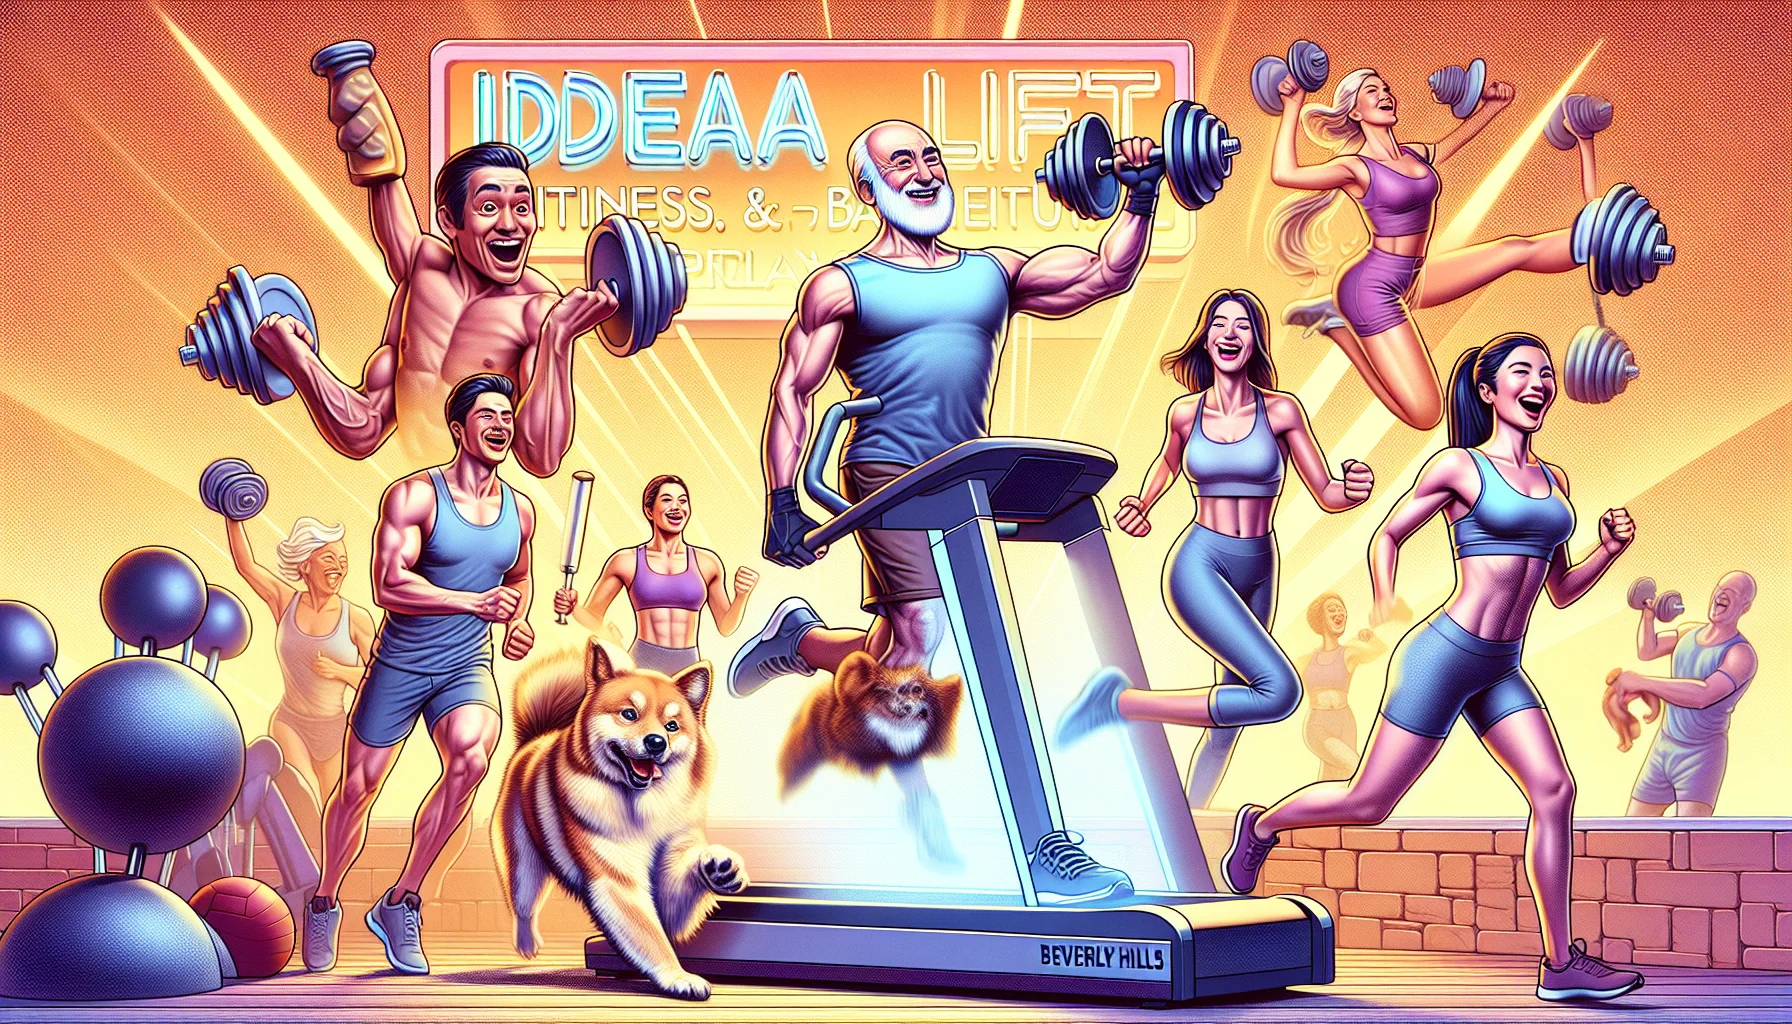 Generate a humorous and lifelike image that features a concept of a lifting fitness and beauty product from Beverly Hills. In the scene, include various people of different descents and genders enthusiastically engaging in an exercise regimen. Use creative elements to make the scene appealing and inviting: perhaps portray a male South Asian person lifting dumbbells heavier than he can handle with a jovial expression or a Caucasian woman on a treadmill with a big grin, racing a small dog. Abstractly represent the 'Idealift' as an invisible force uplifting and cheering these exercisers, emphasizing fun, fitness, and beauty.